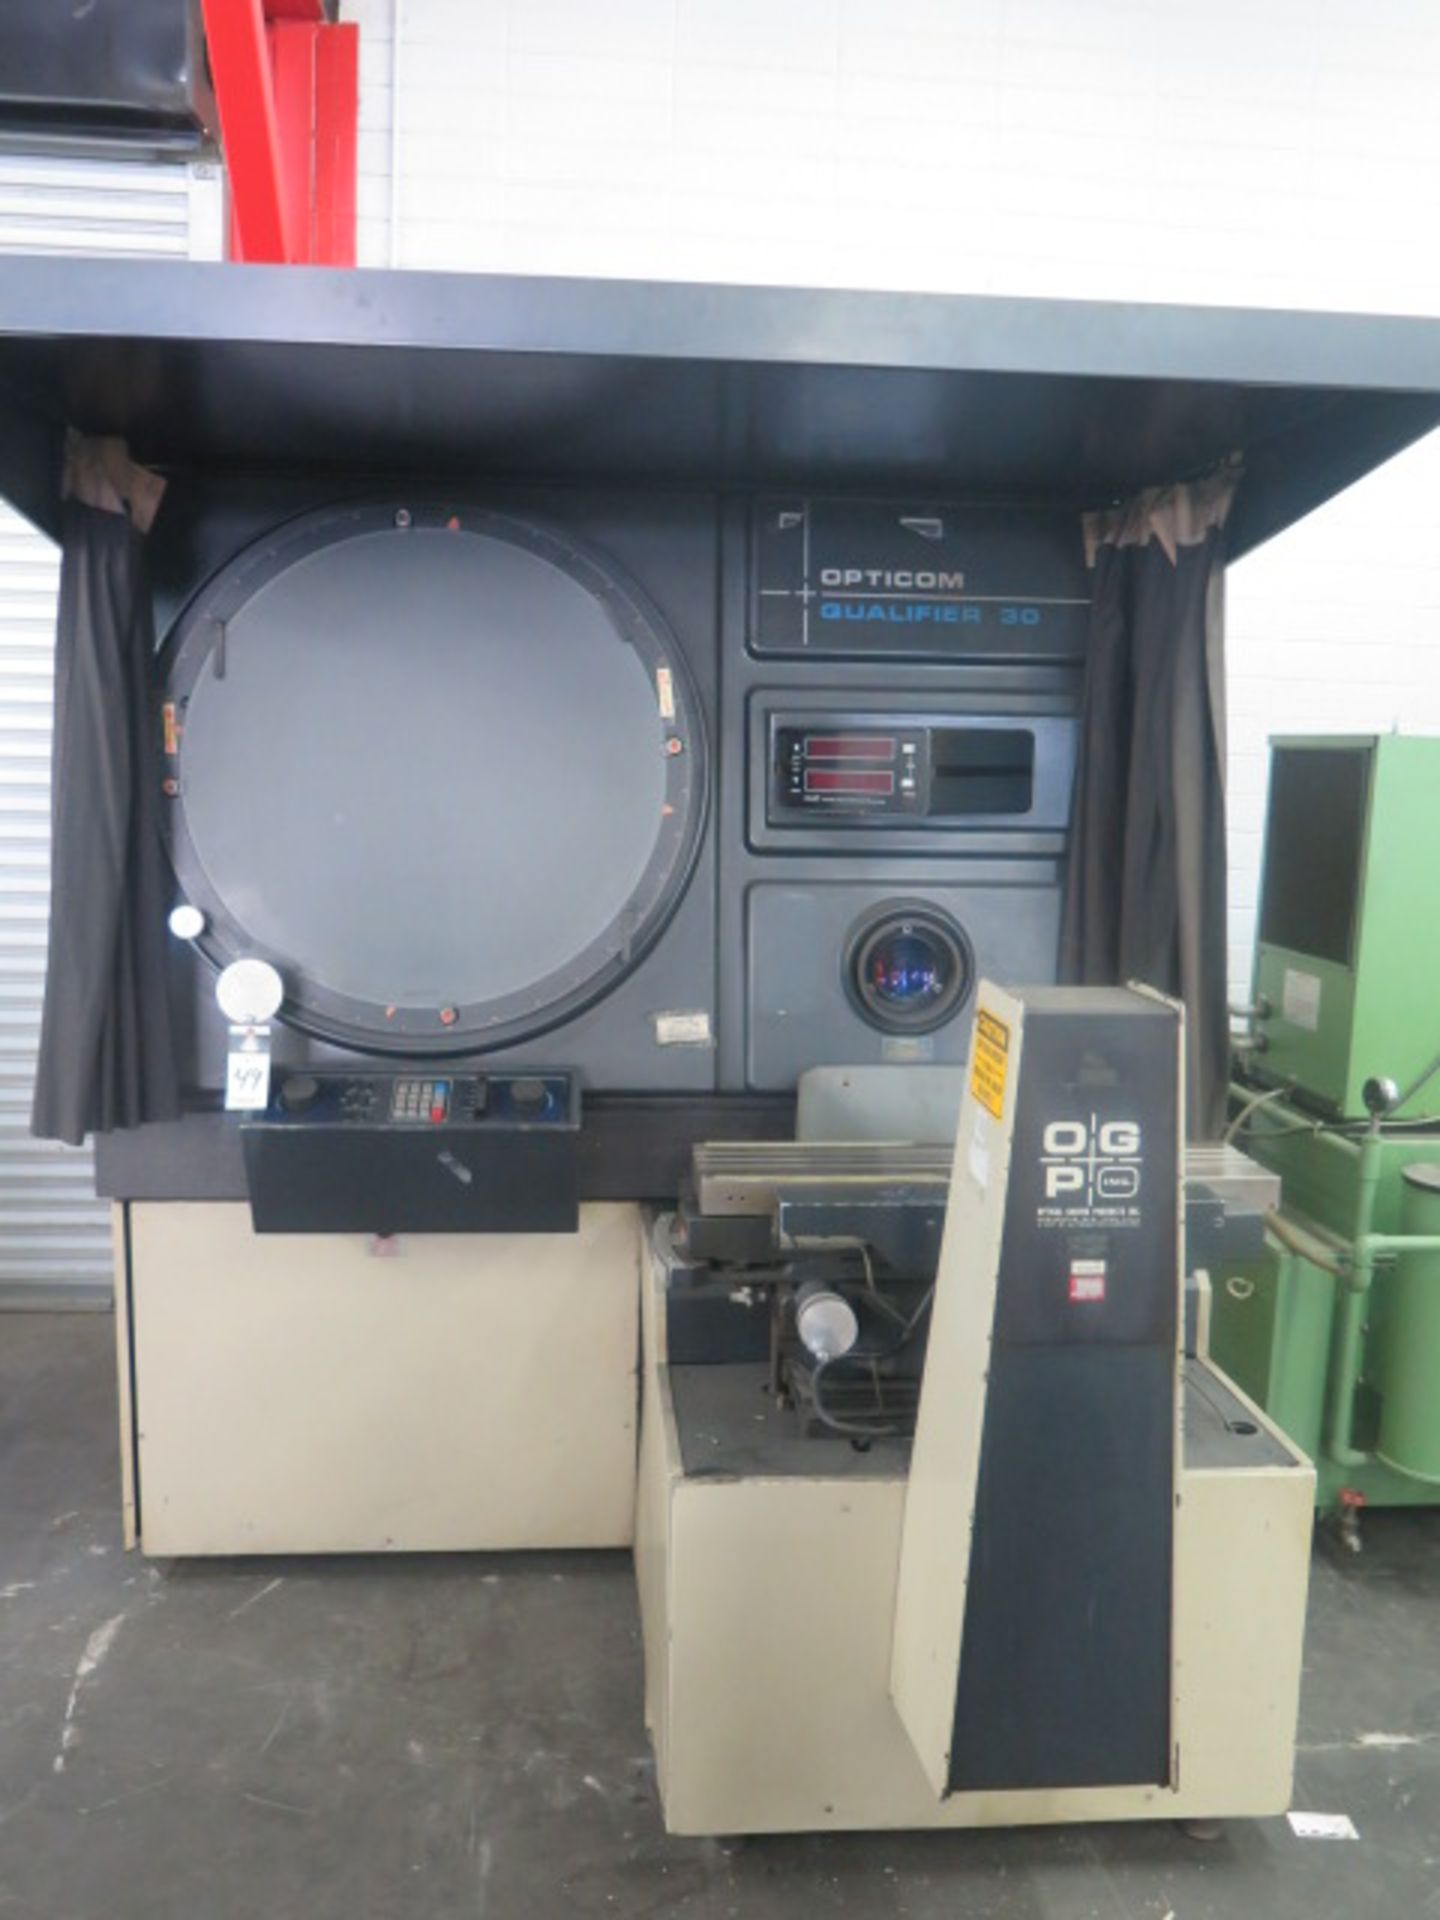 OGP Optical Gaging Co. “Opticon Qualifier 30” mdl. 0030S 30” Optical Comparator s/n 00300-340 w/ - Image 2 of 8